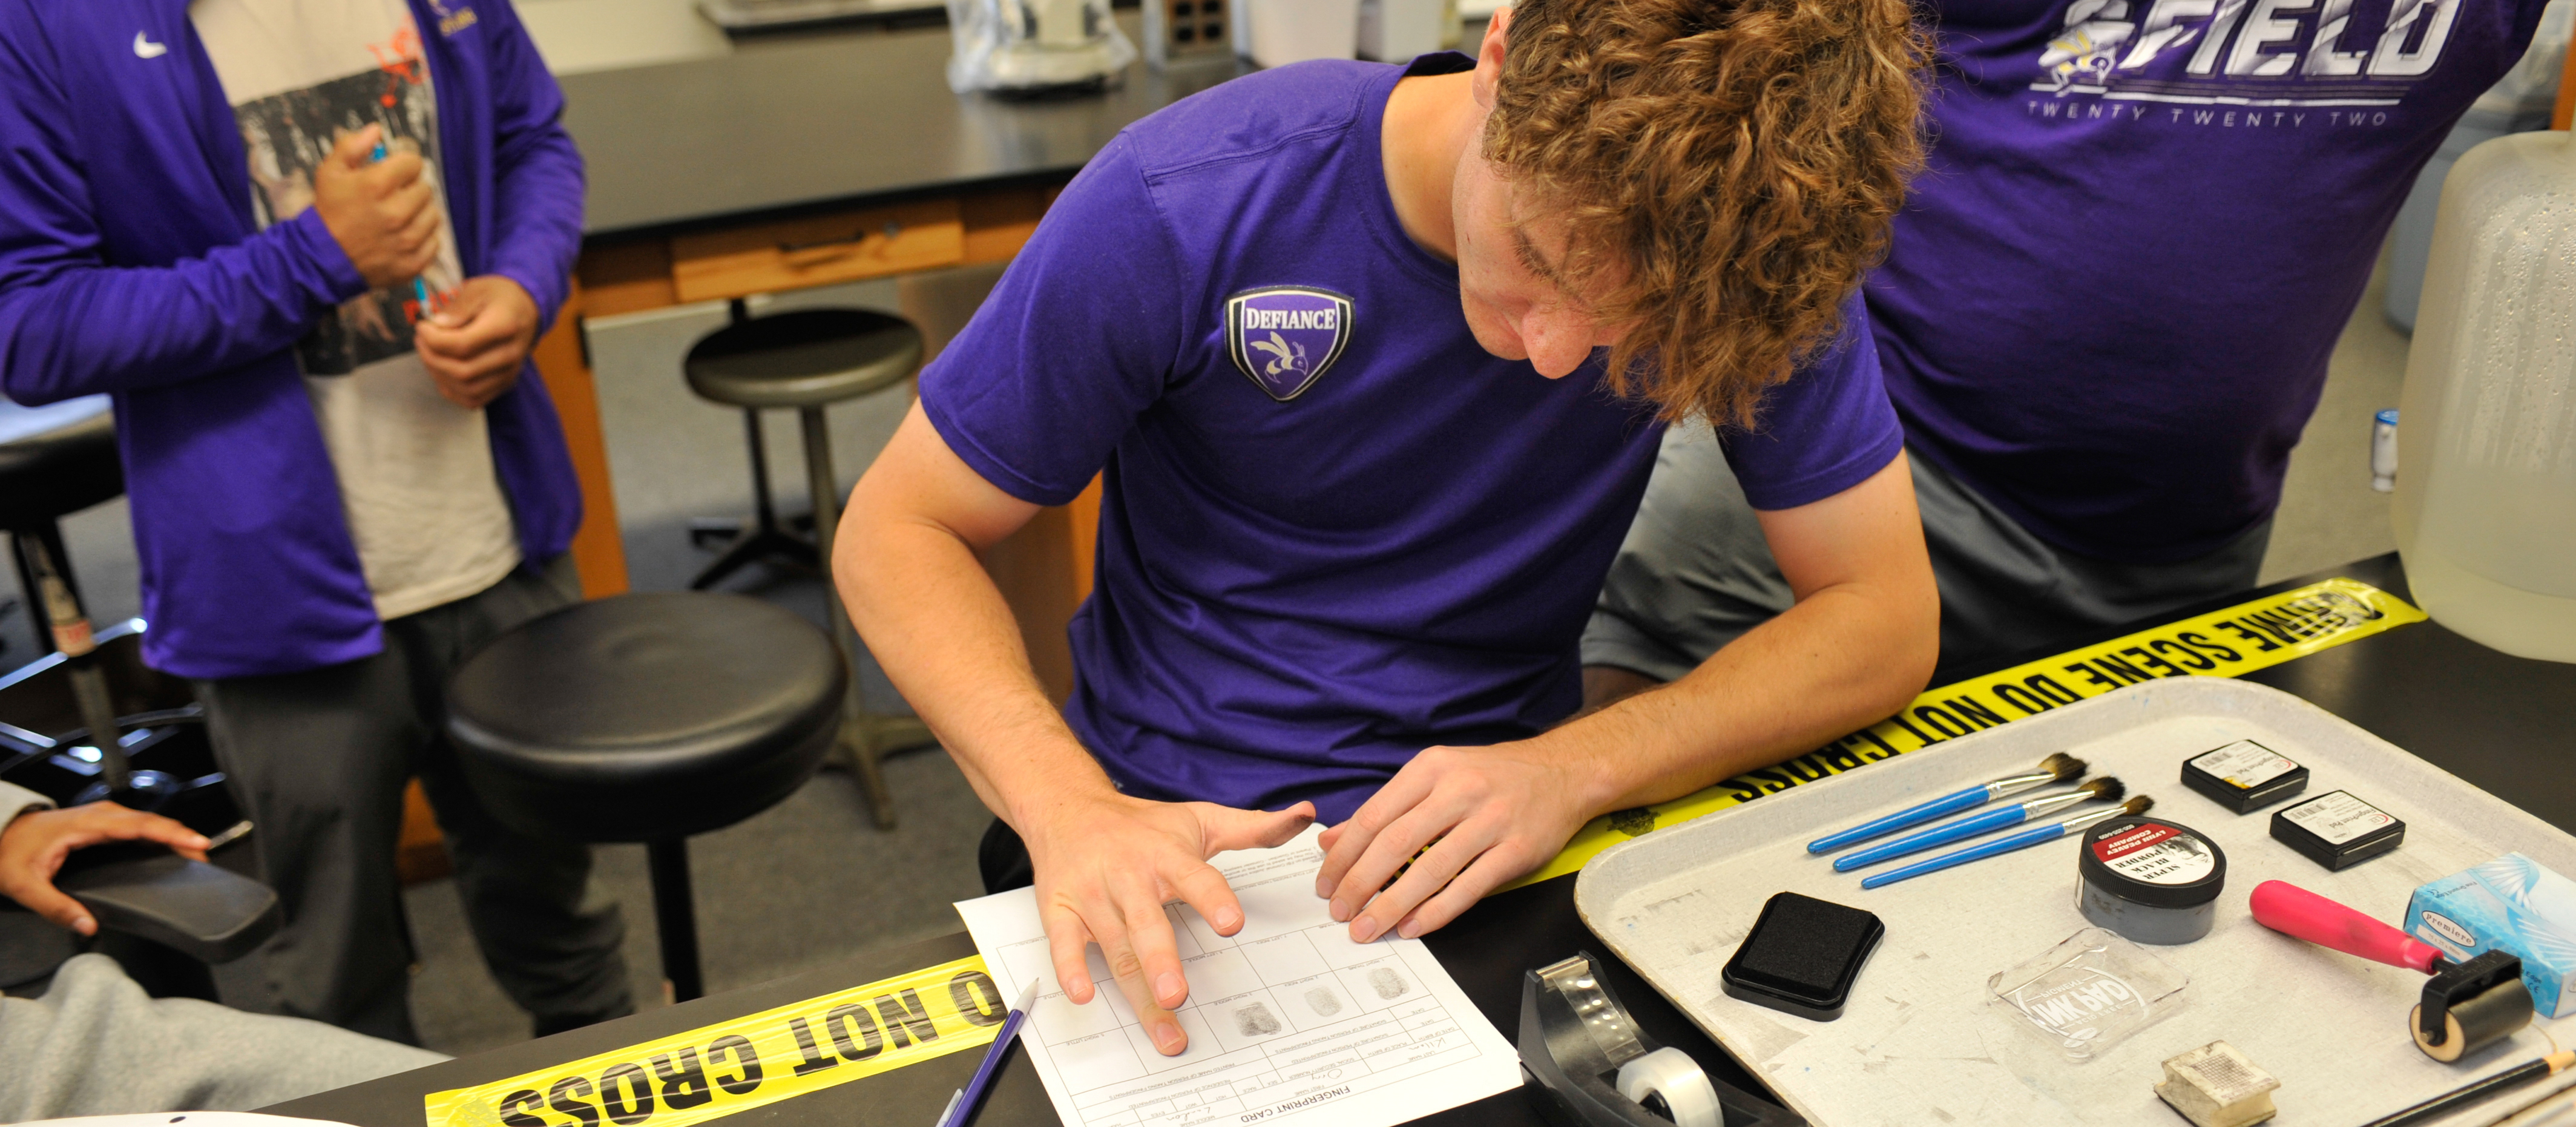 student fingerprinting himself with crime scene tape featured